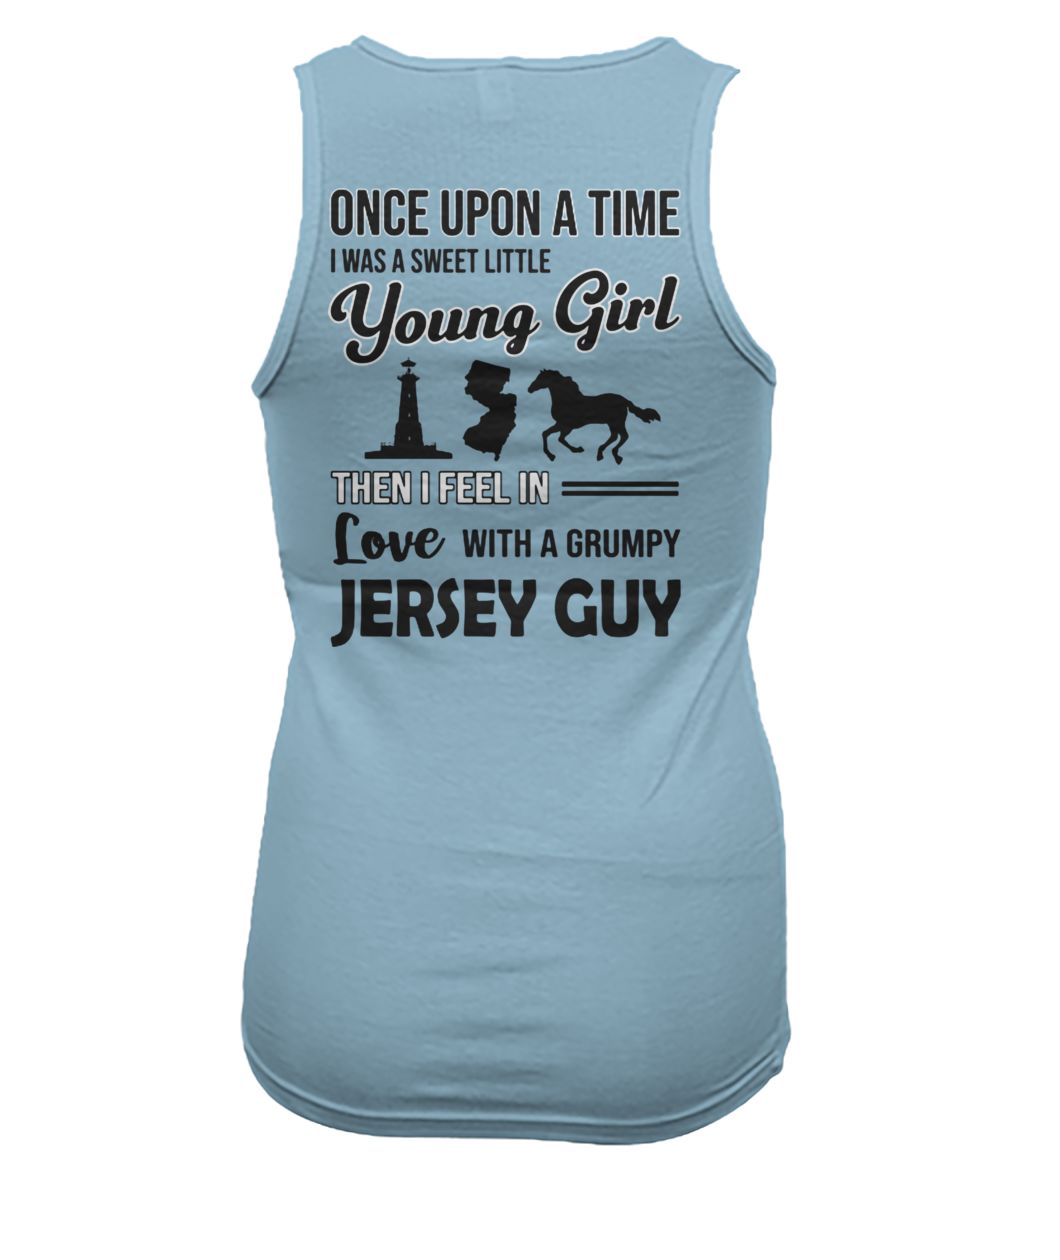 Once upon a time I was a sweet little young girl then I feel in love with a grumpy jersey guy women's tank top